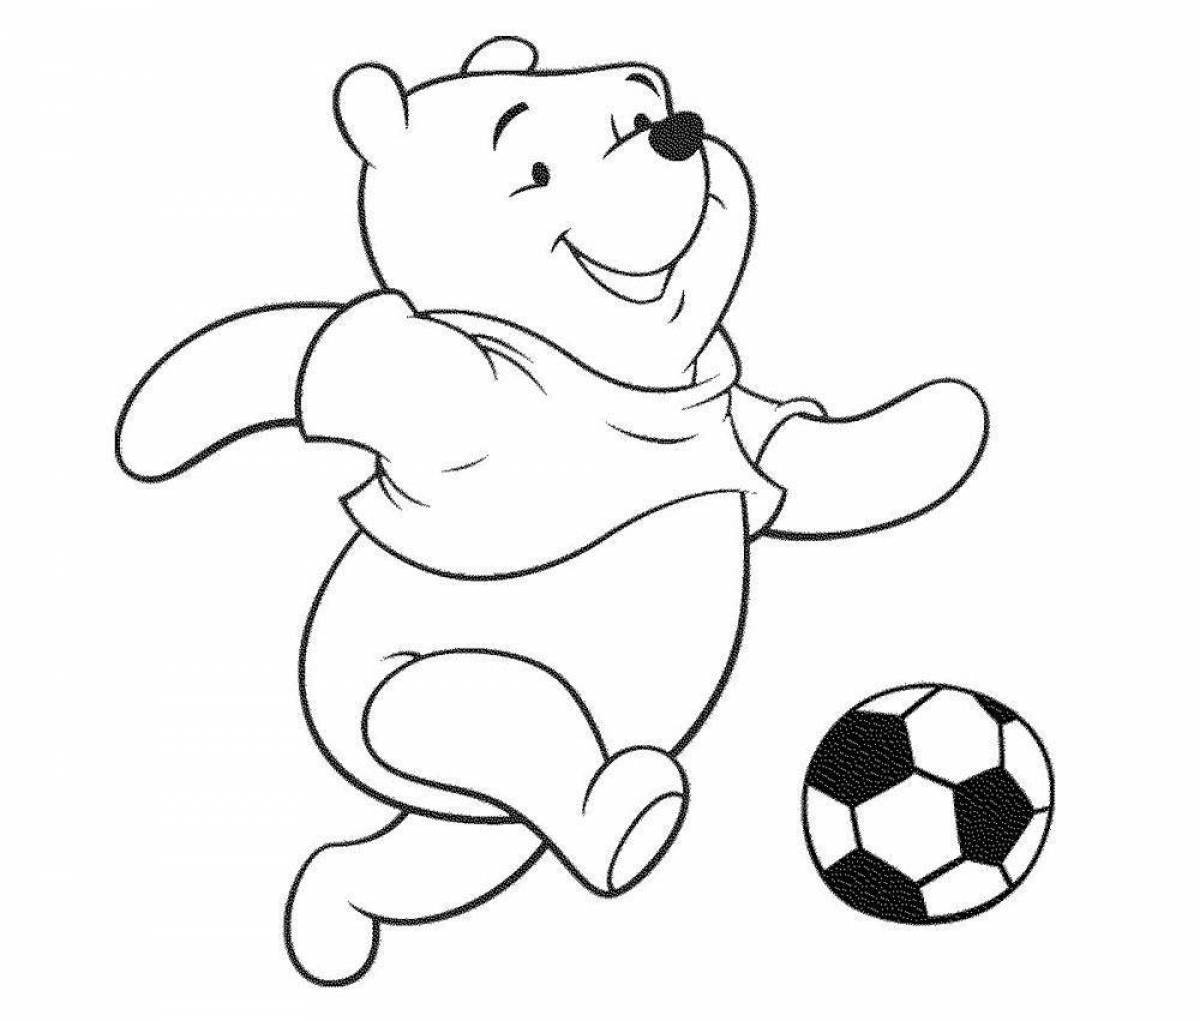 Colorful football coloring book for kids